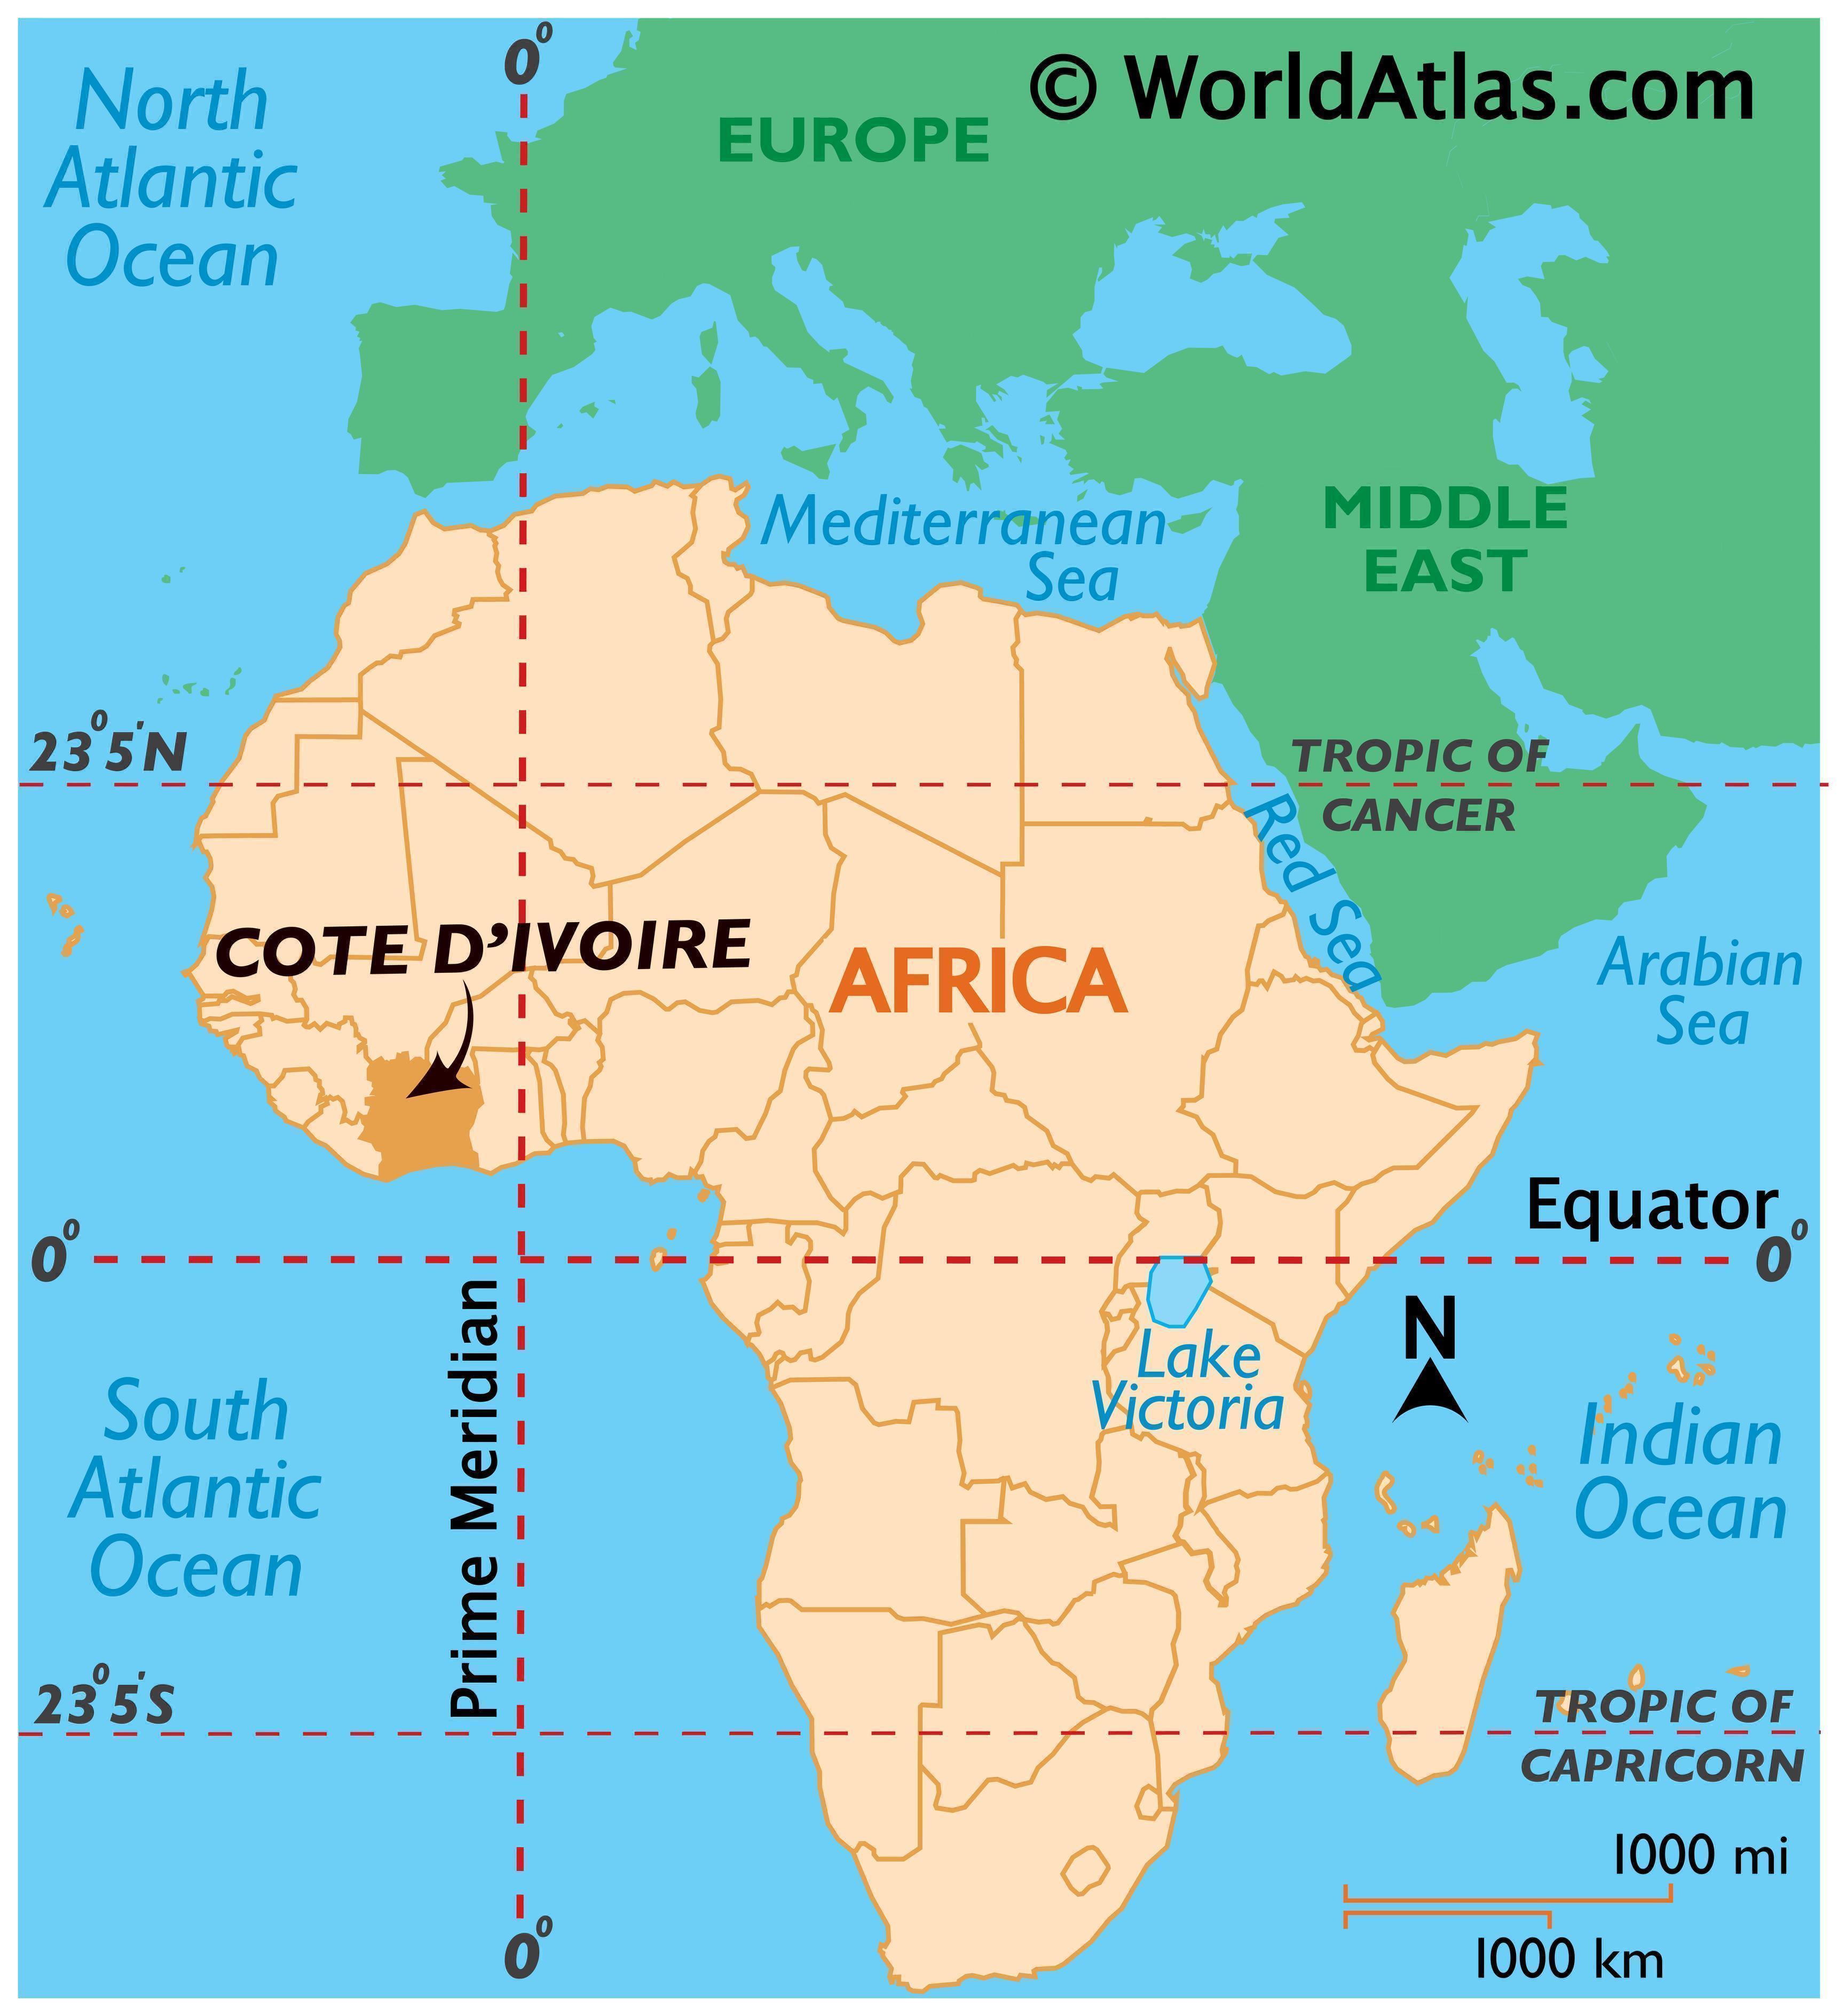 Bye bye Swimming pool include Cote d'Ivoire Maps & Facts - World Atlas